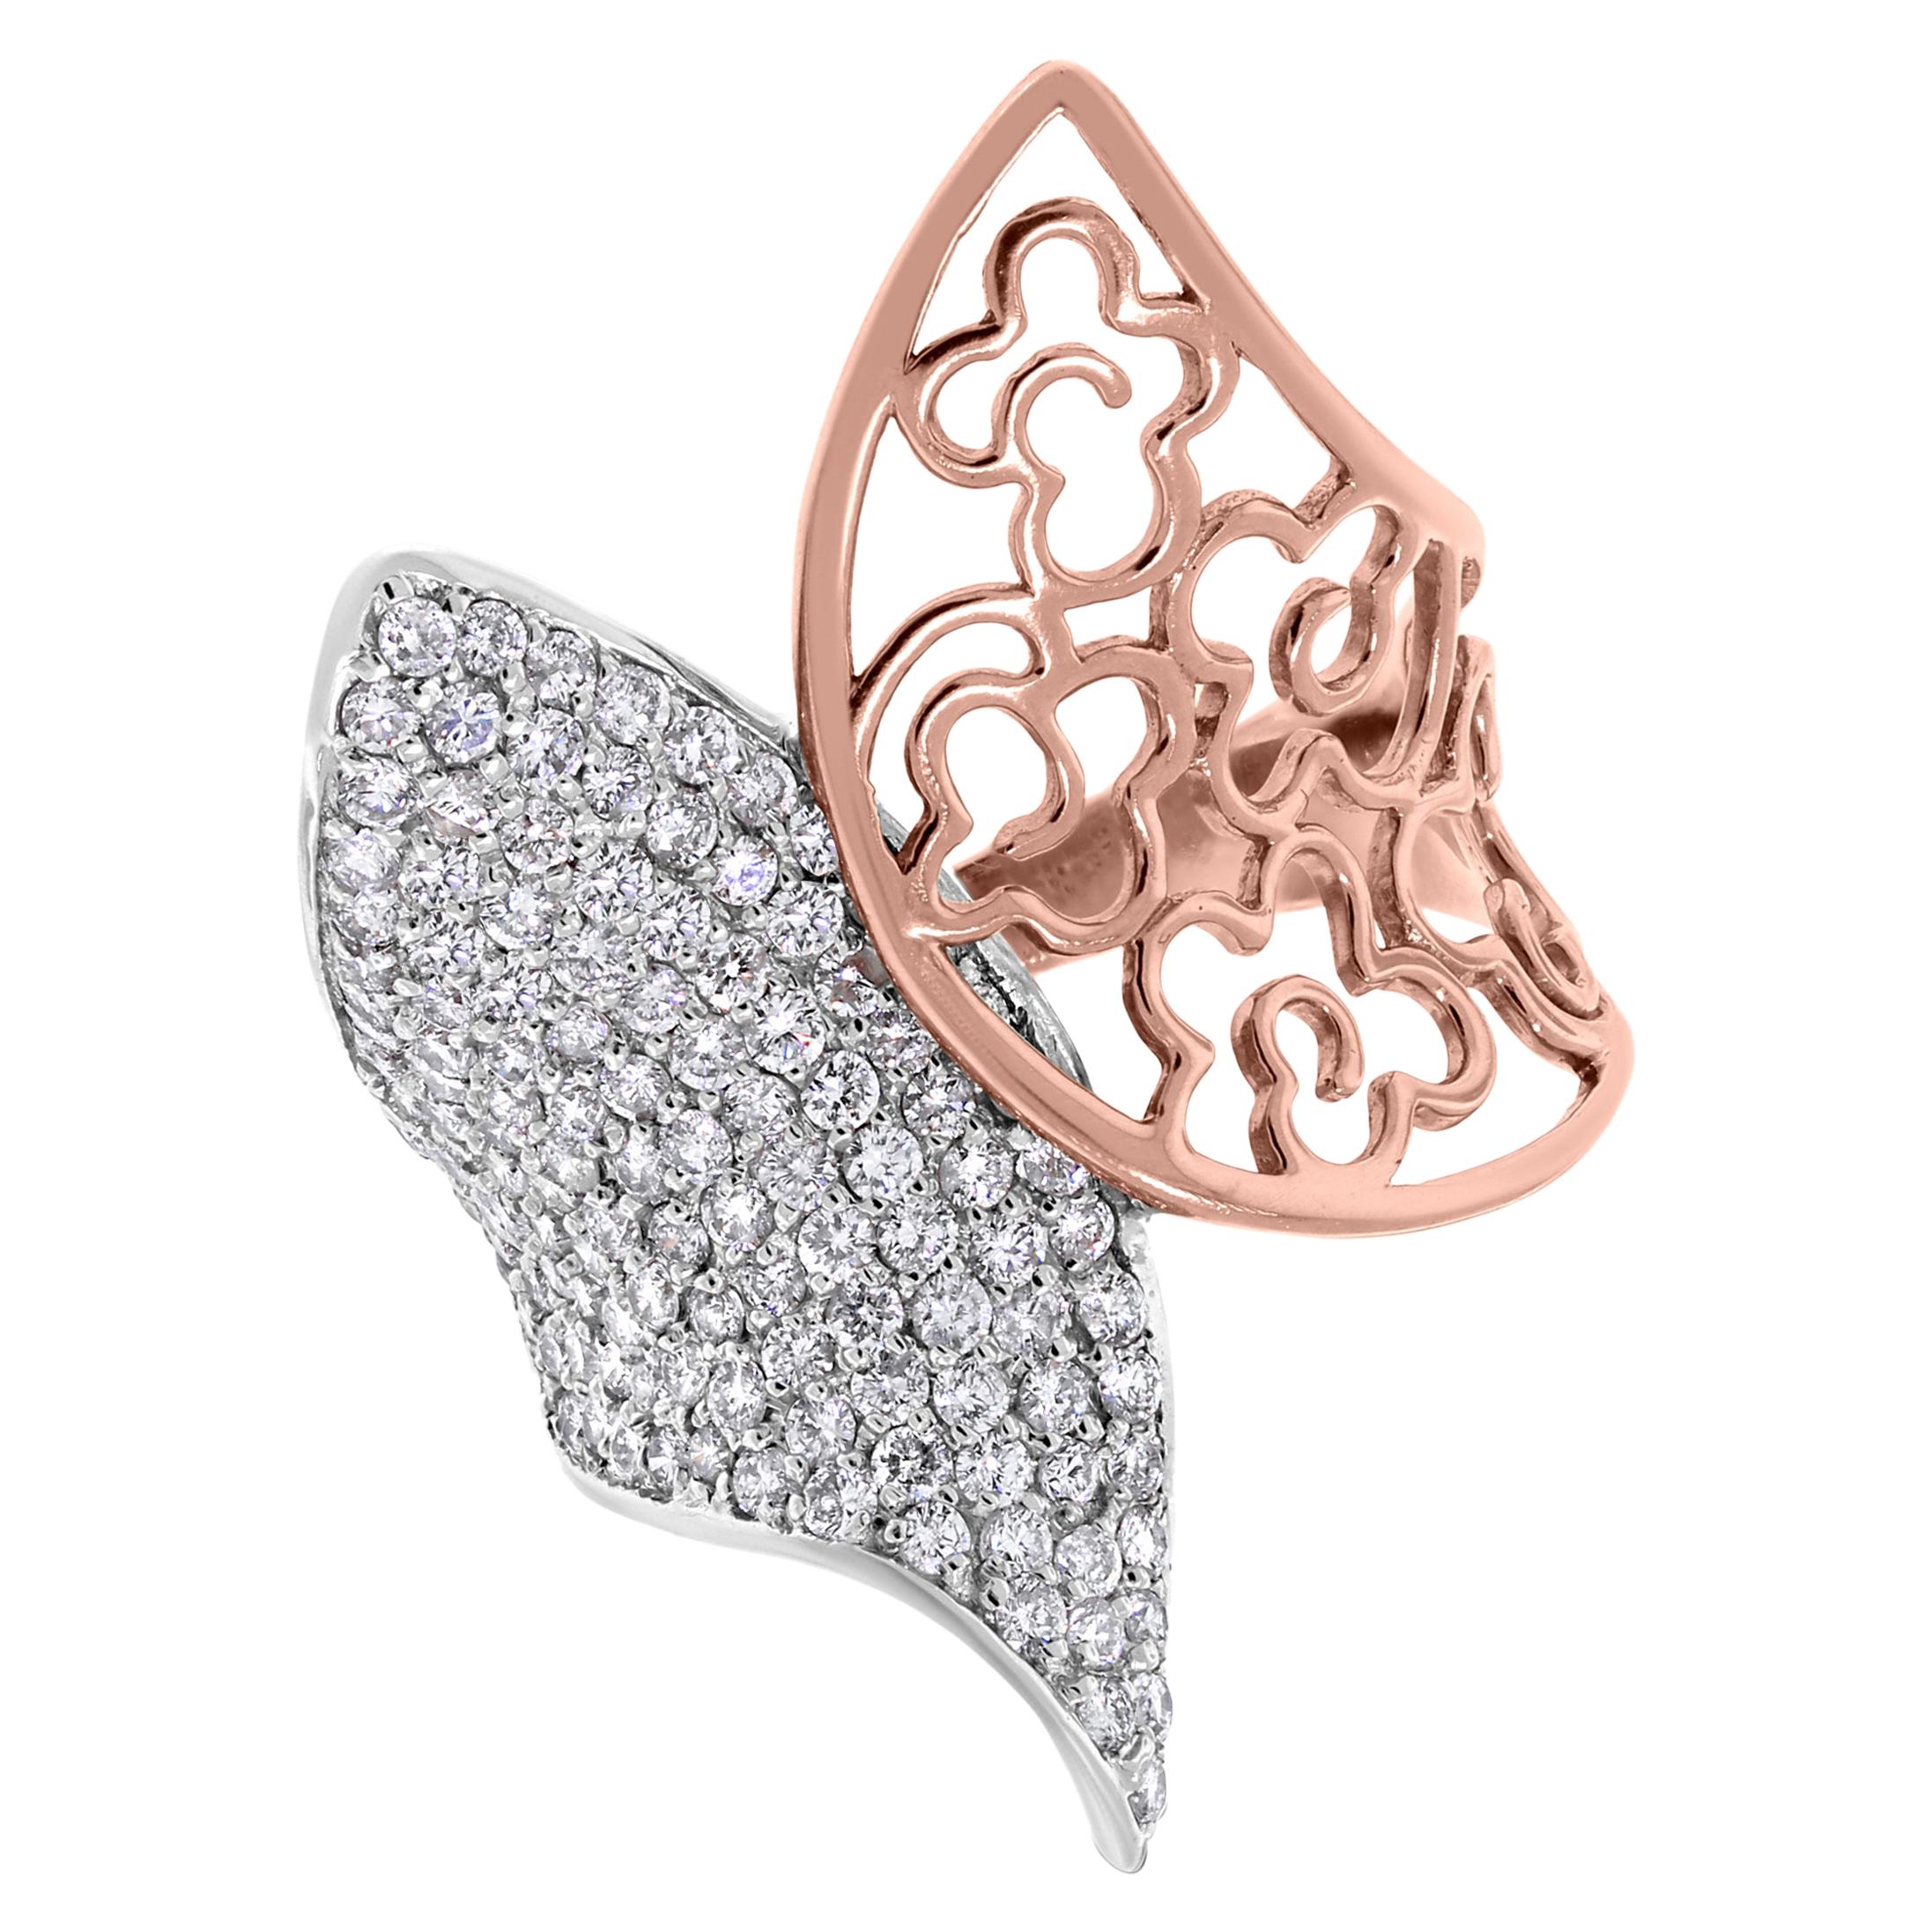 Beauvince Lolita Floral Diamond Cocktail Ring in White and Rose Gold For Sale